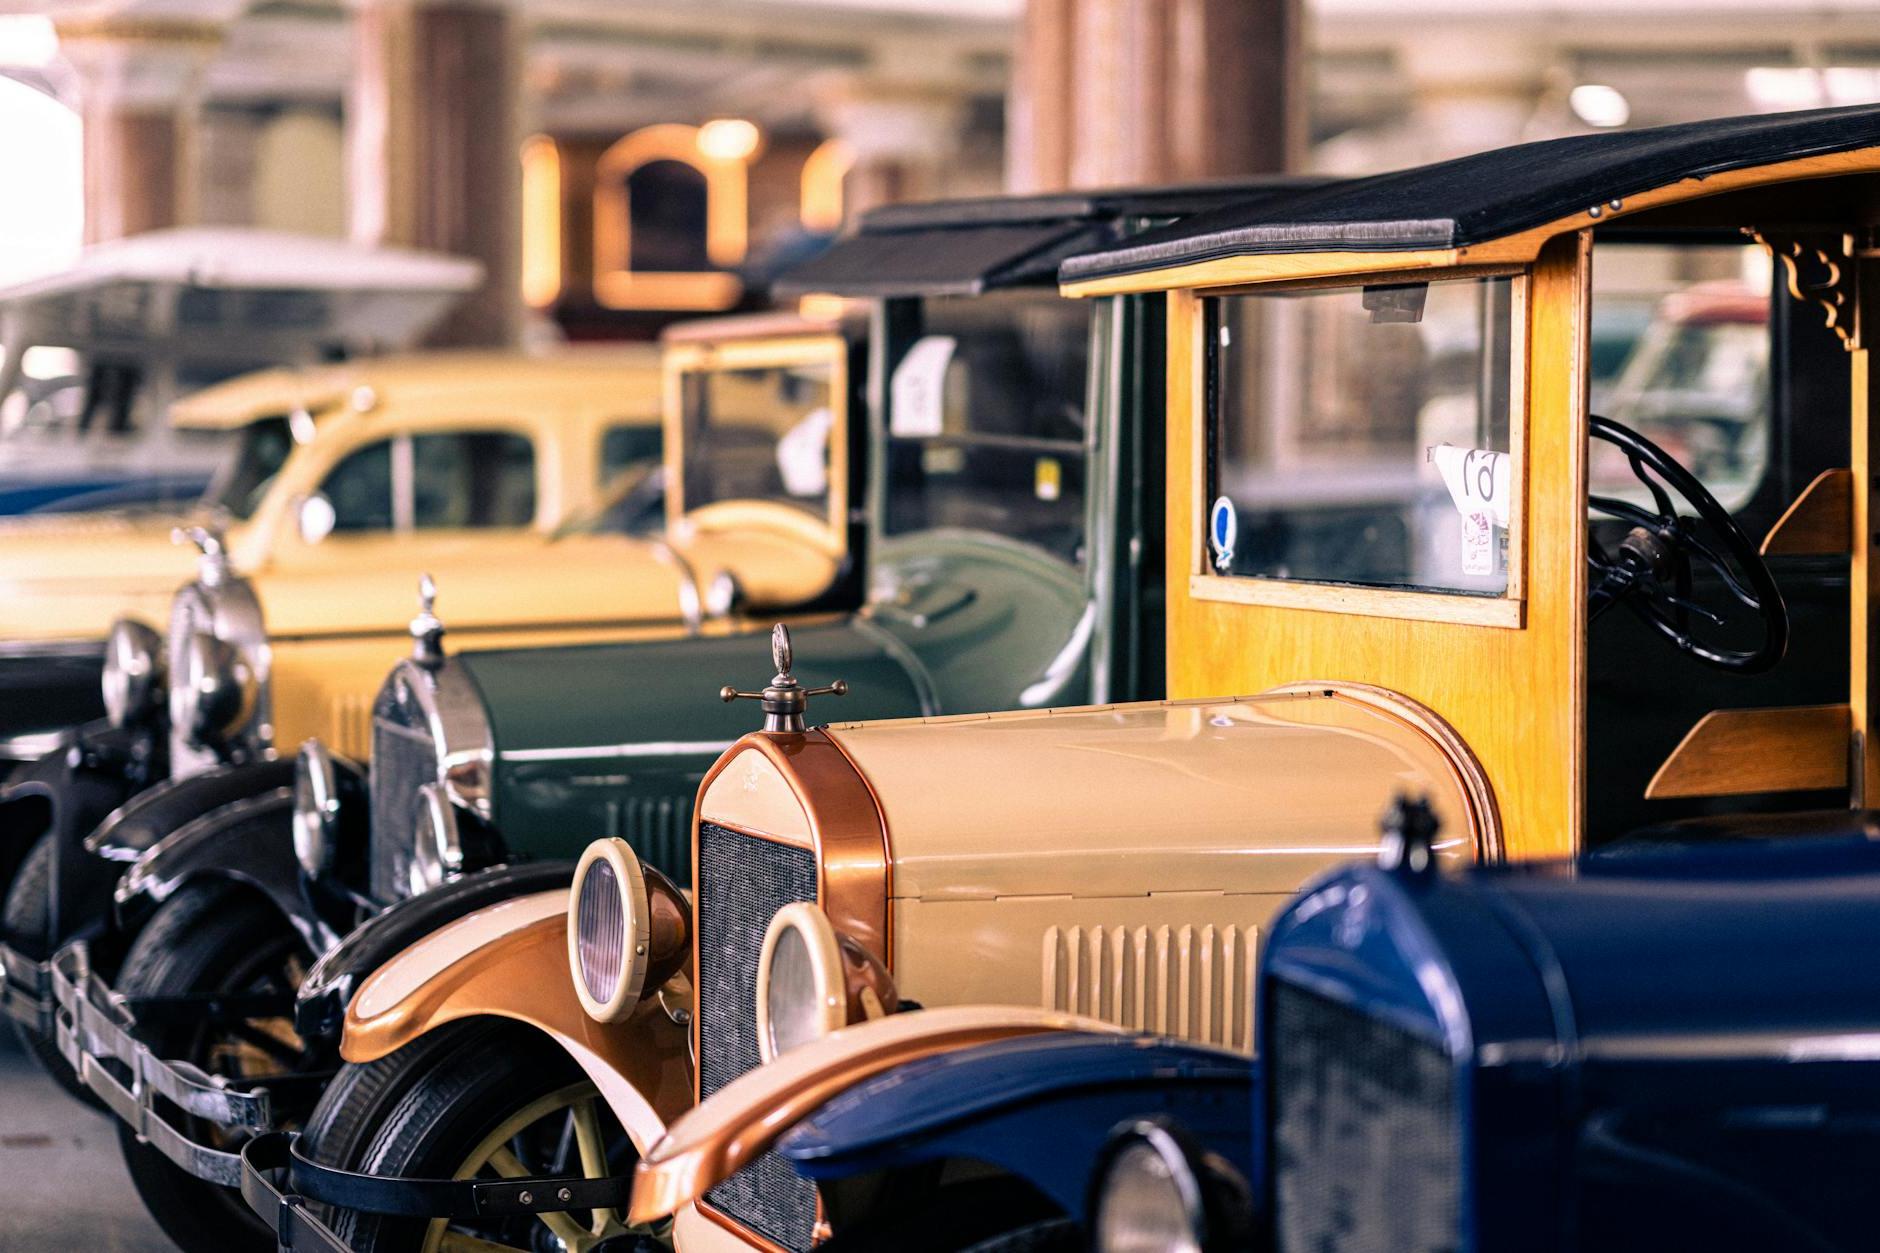 A Row of Antique Cars Exhibited in a Museum